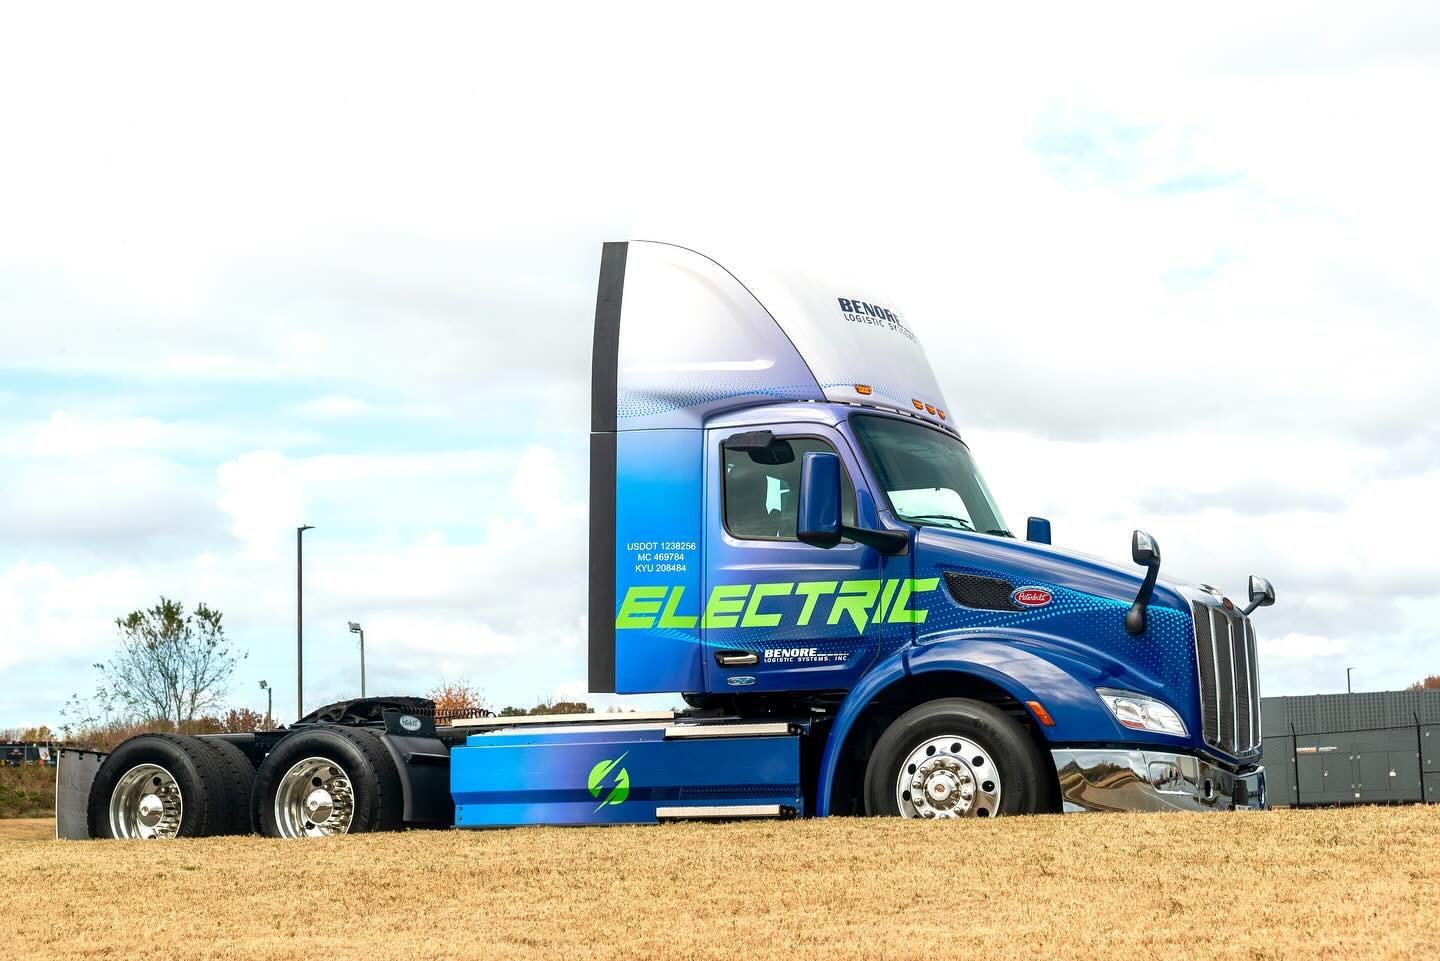 Forging ahead in electric innovation! 

Benore was delighted to announce the expansion of our electric vehicle (EV) fleet with four additional Peterbilt 579EVs, bringing our total electric fleet to seven. This solidified Benore as a leader in sustain